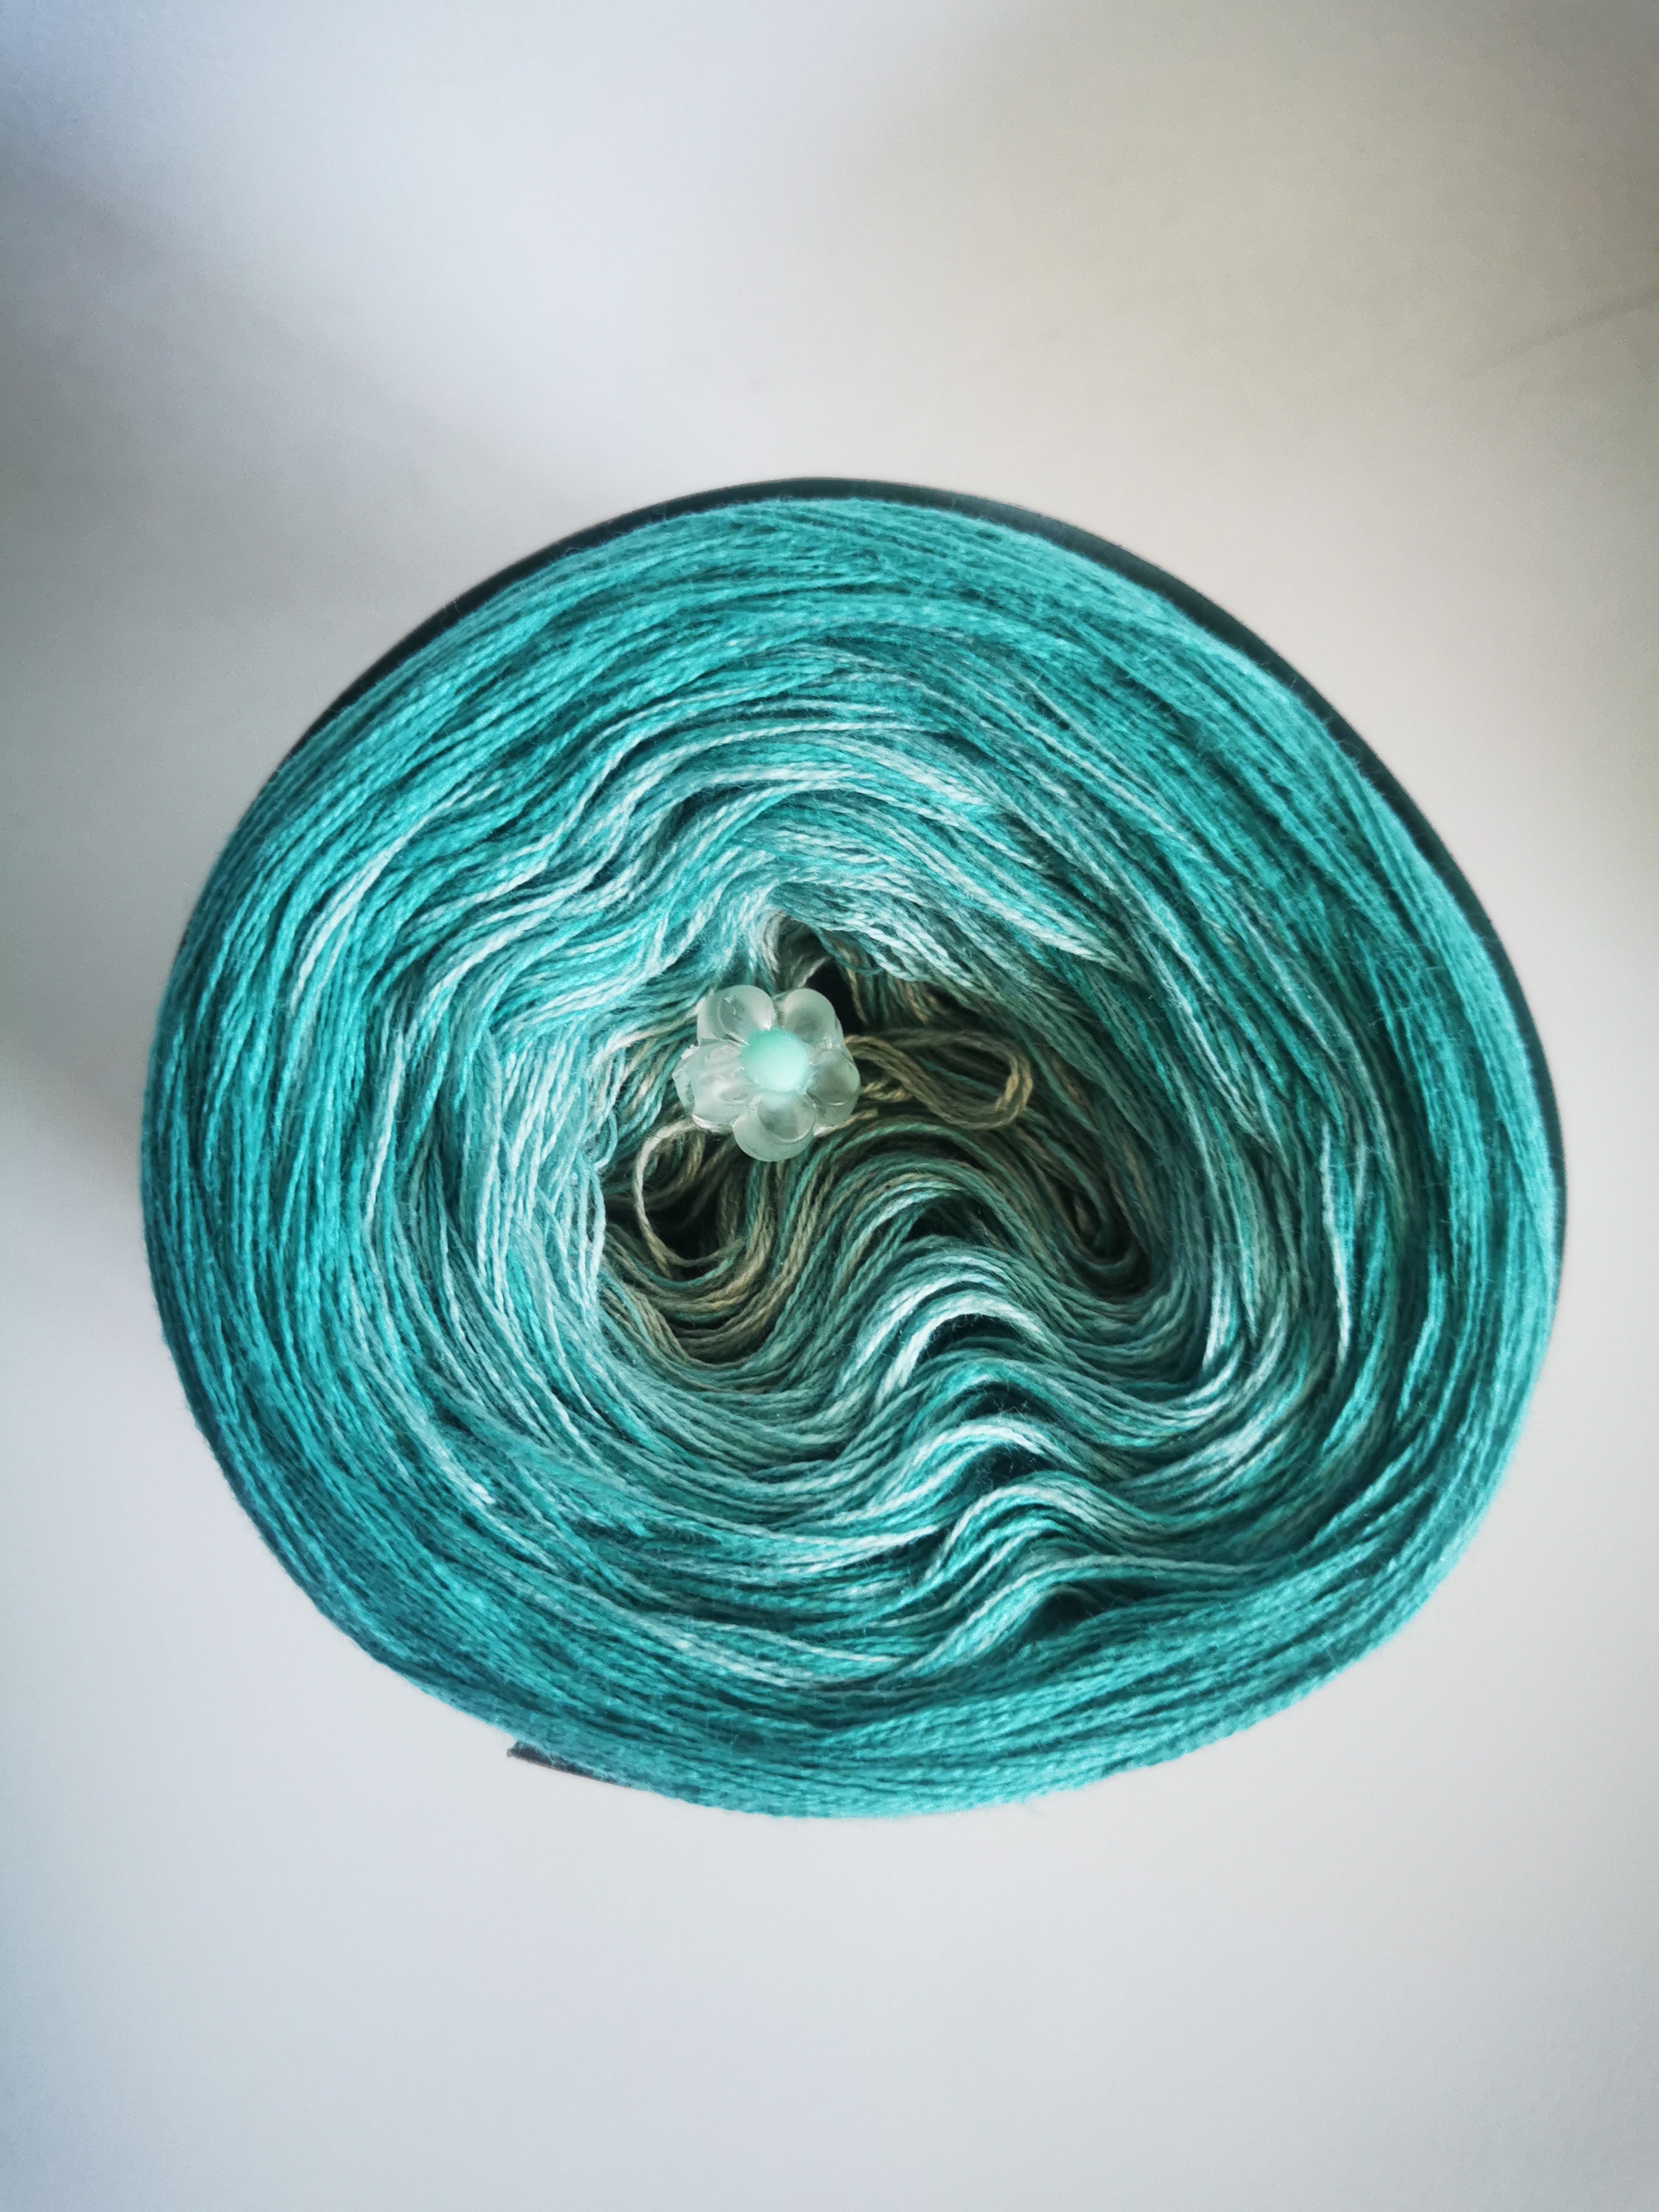 Gradient yarn cake, colour combination CM137 – Blooming Yarns by KW